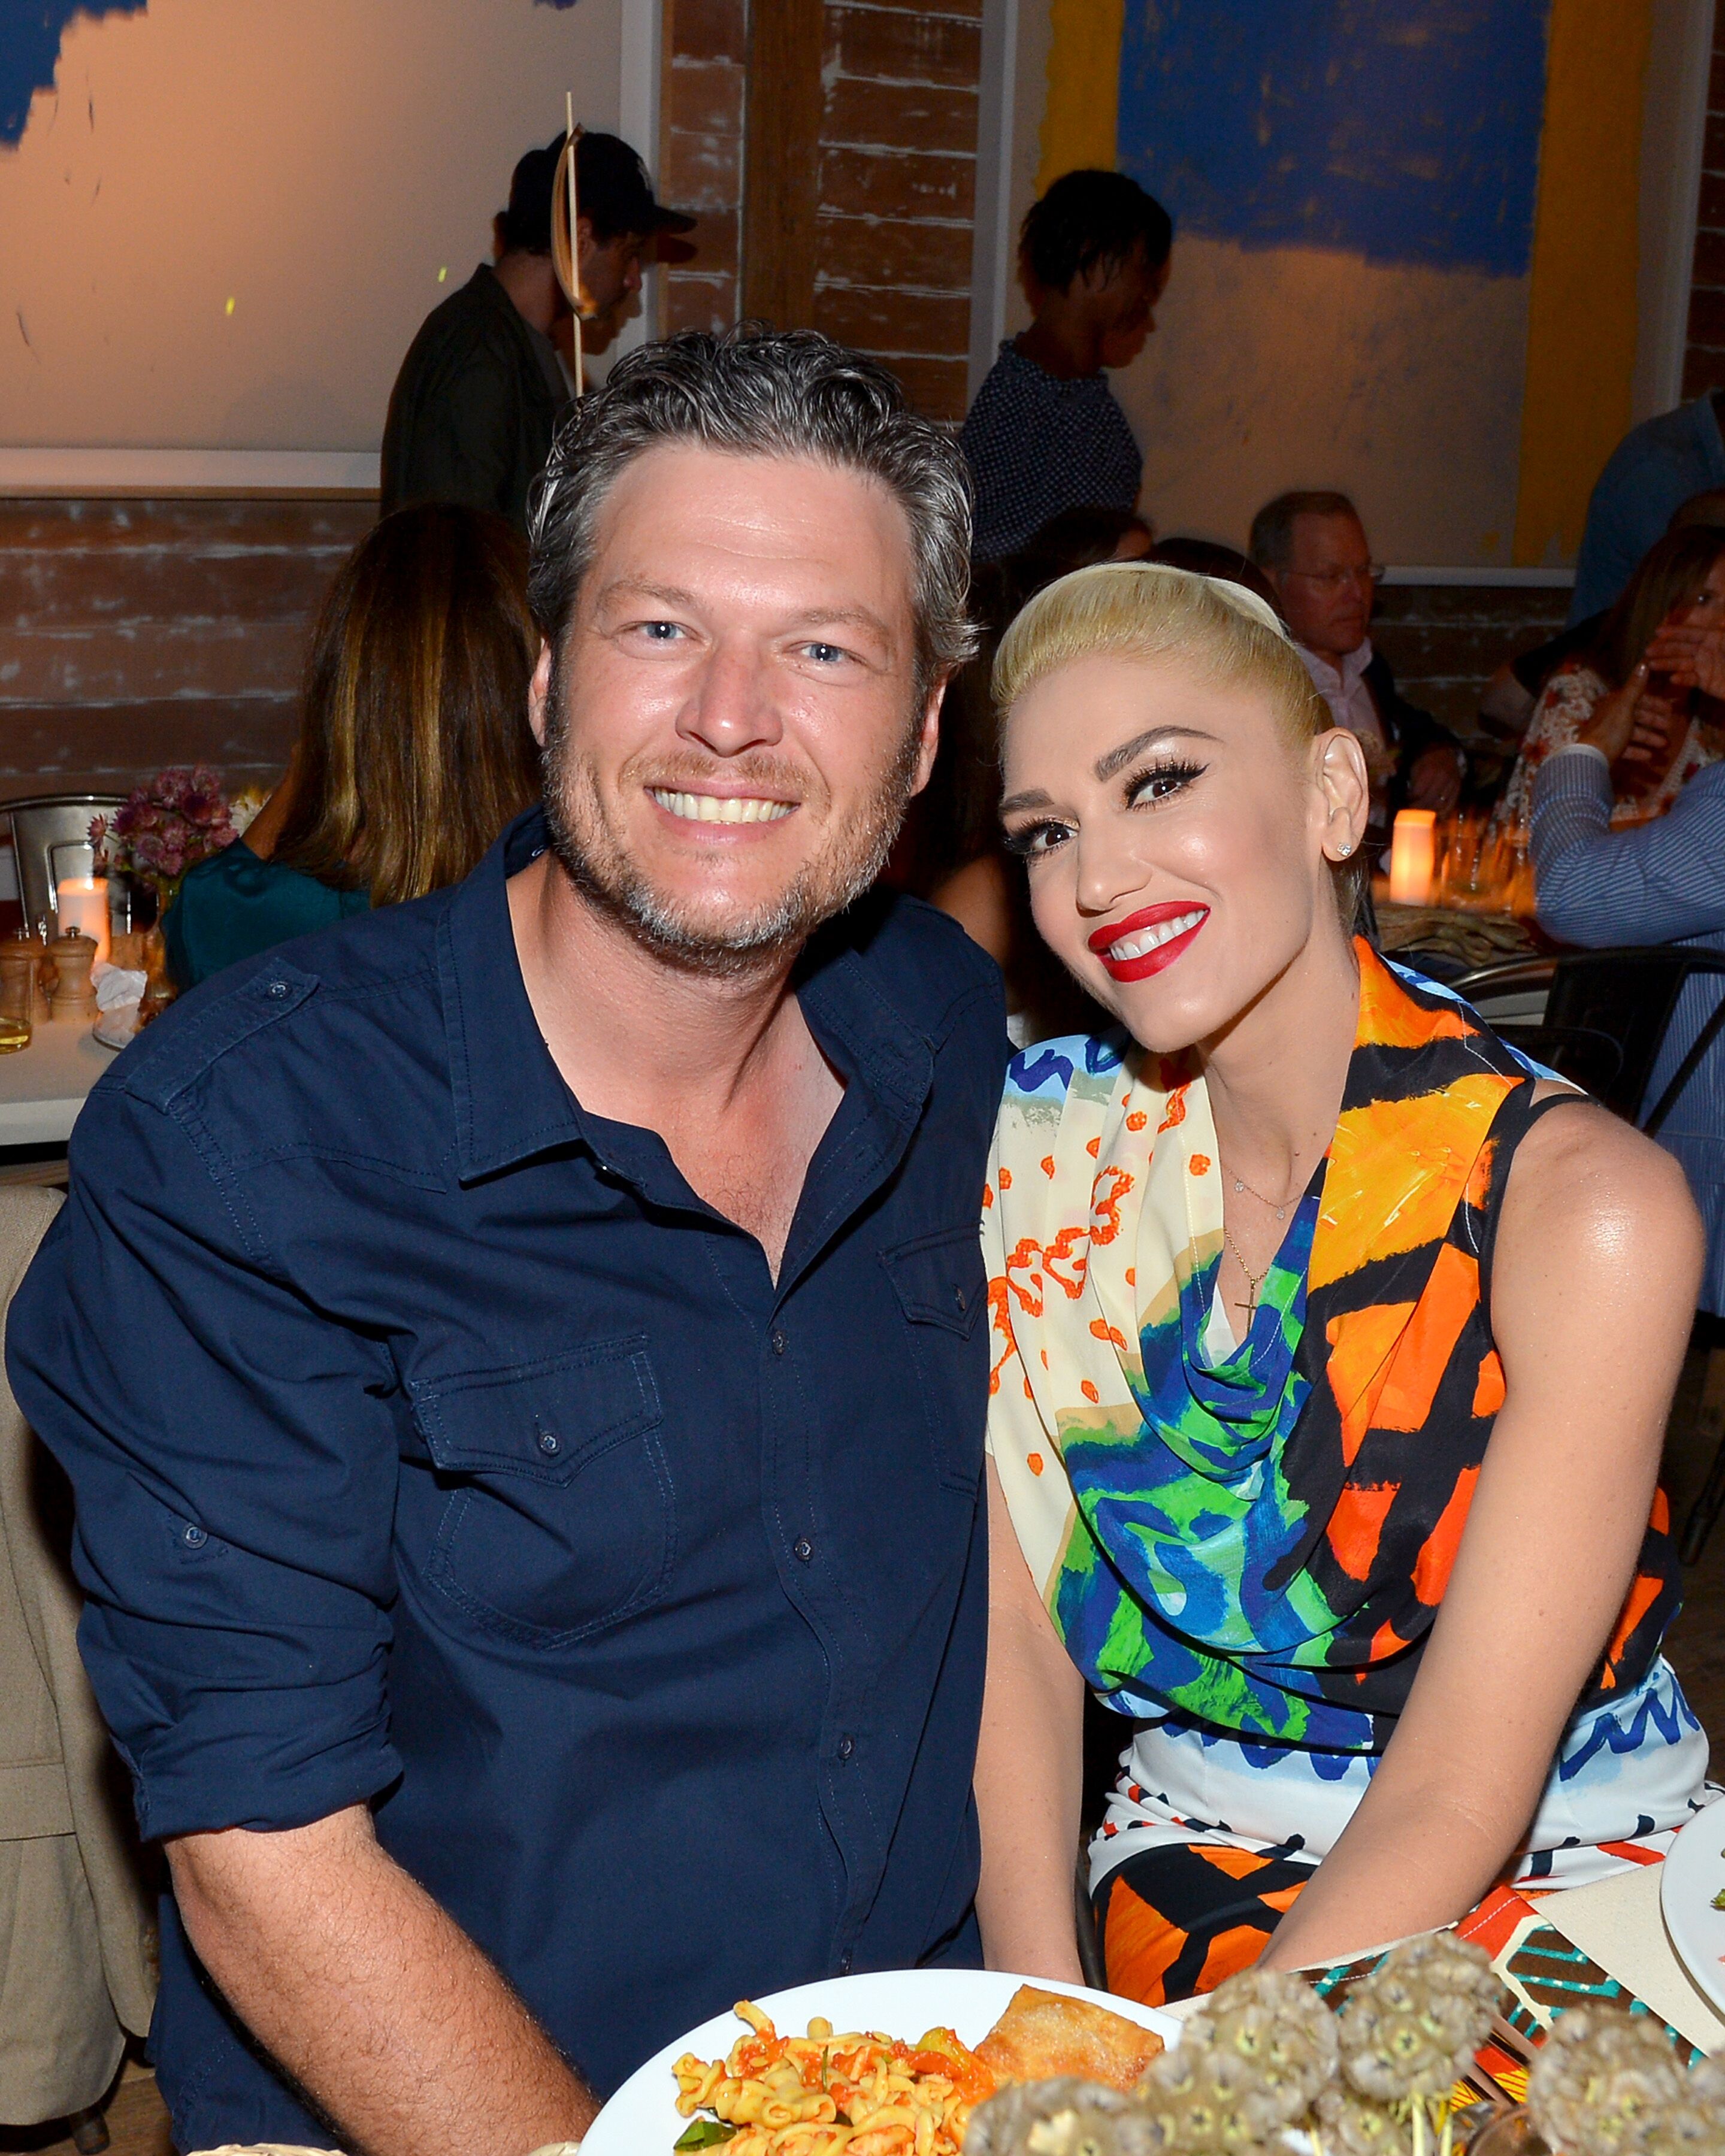 Blake Shelton and Gwen Stefani at the Apollo in the Hamptons party on August 20, 2016, in East Hampton, New York | Photo: Getty Images